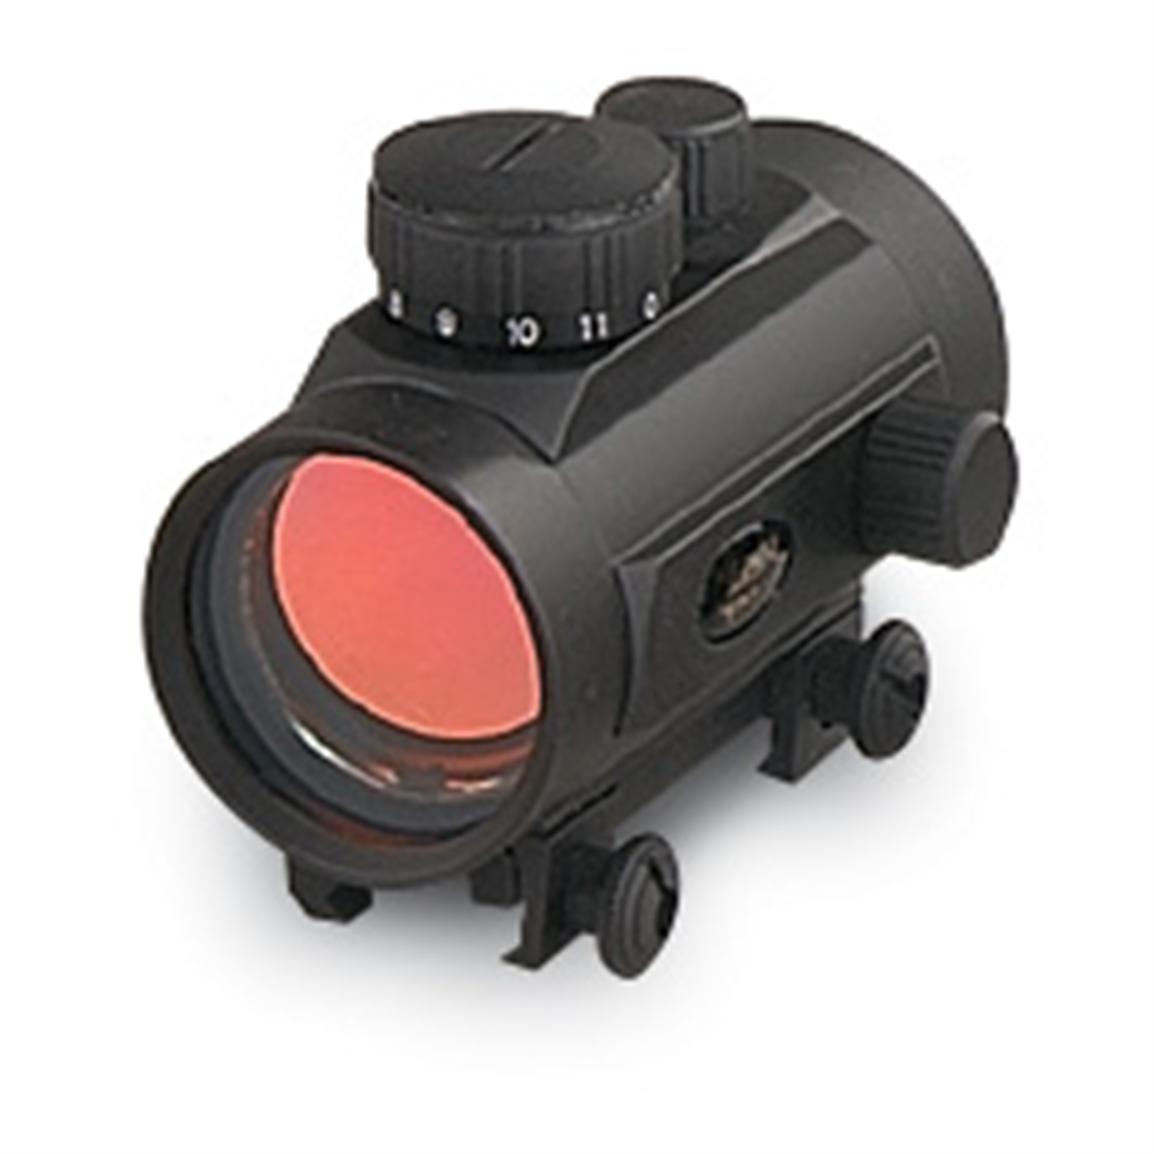 Bsa® 30 Mm 22 Red Dot Scope Silver 150831 Red Dot Sights At